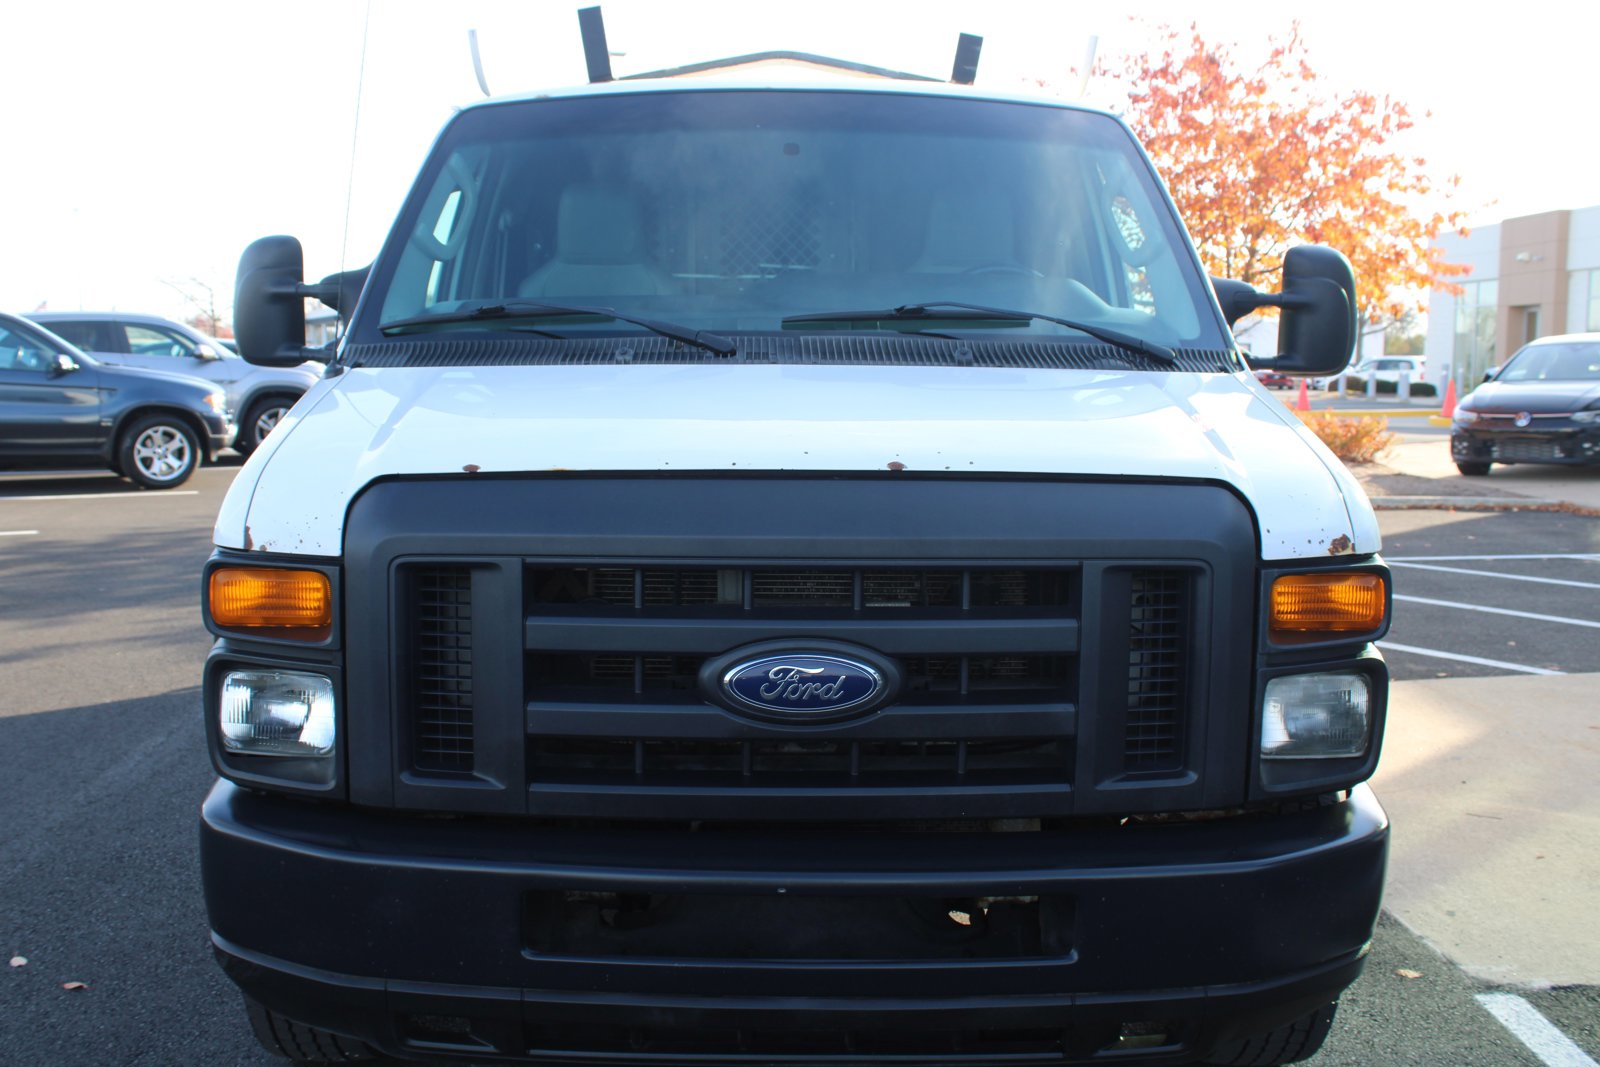 Used 2012 Ford E-Series Econoline Van Commercial with VIN 1FTNE2EL7CDA79668 for sale in Perrysburg, OH